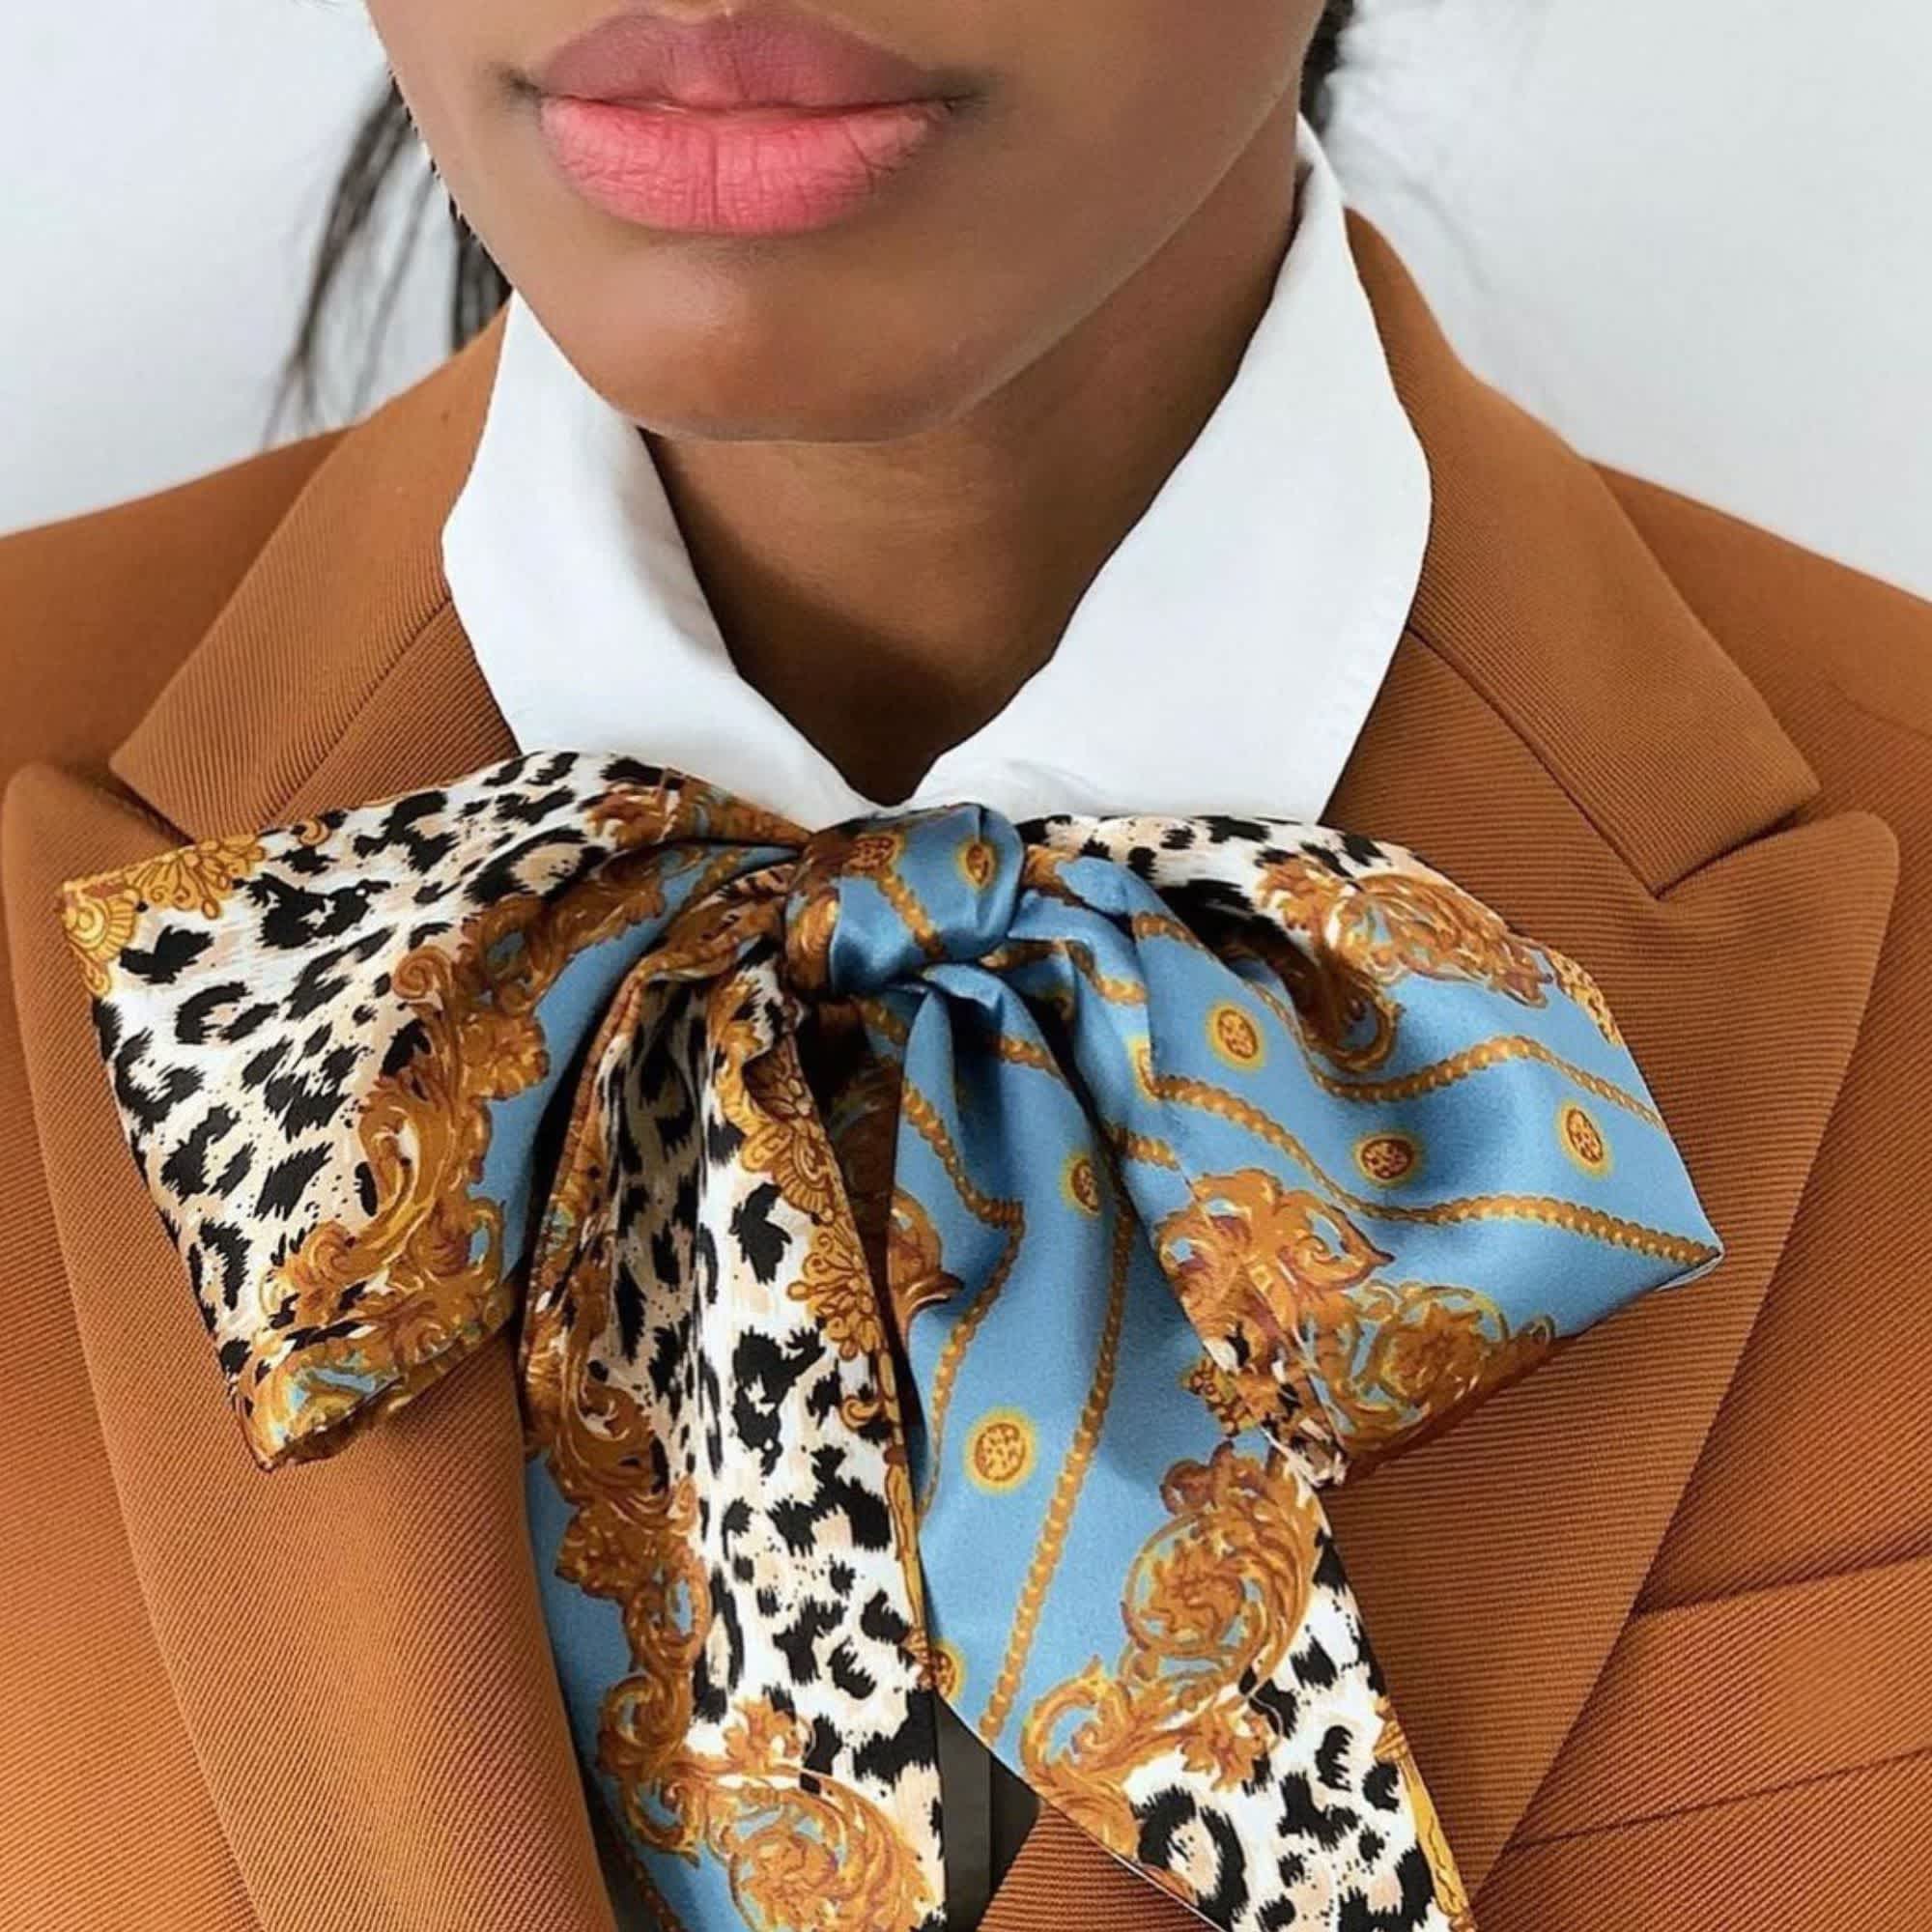 Keep Warm and Stay Cute With These 5 Genius Scarf Hacks - POPSUGAR ...